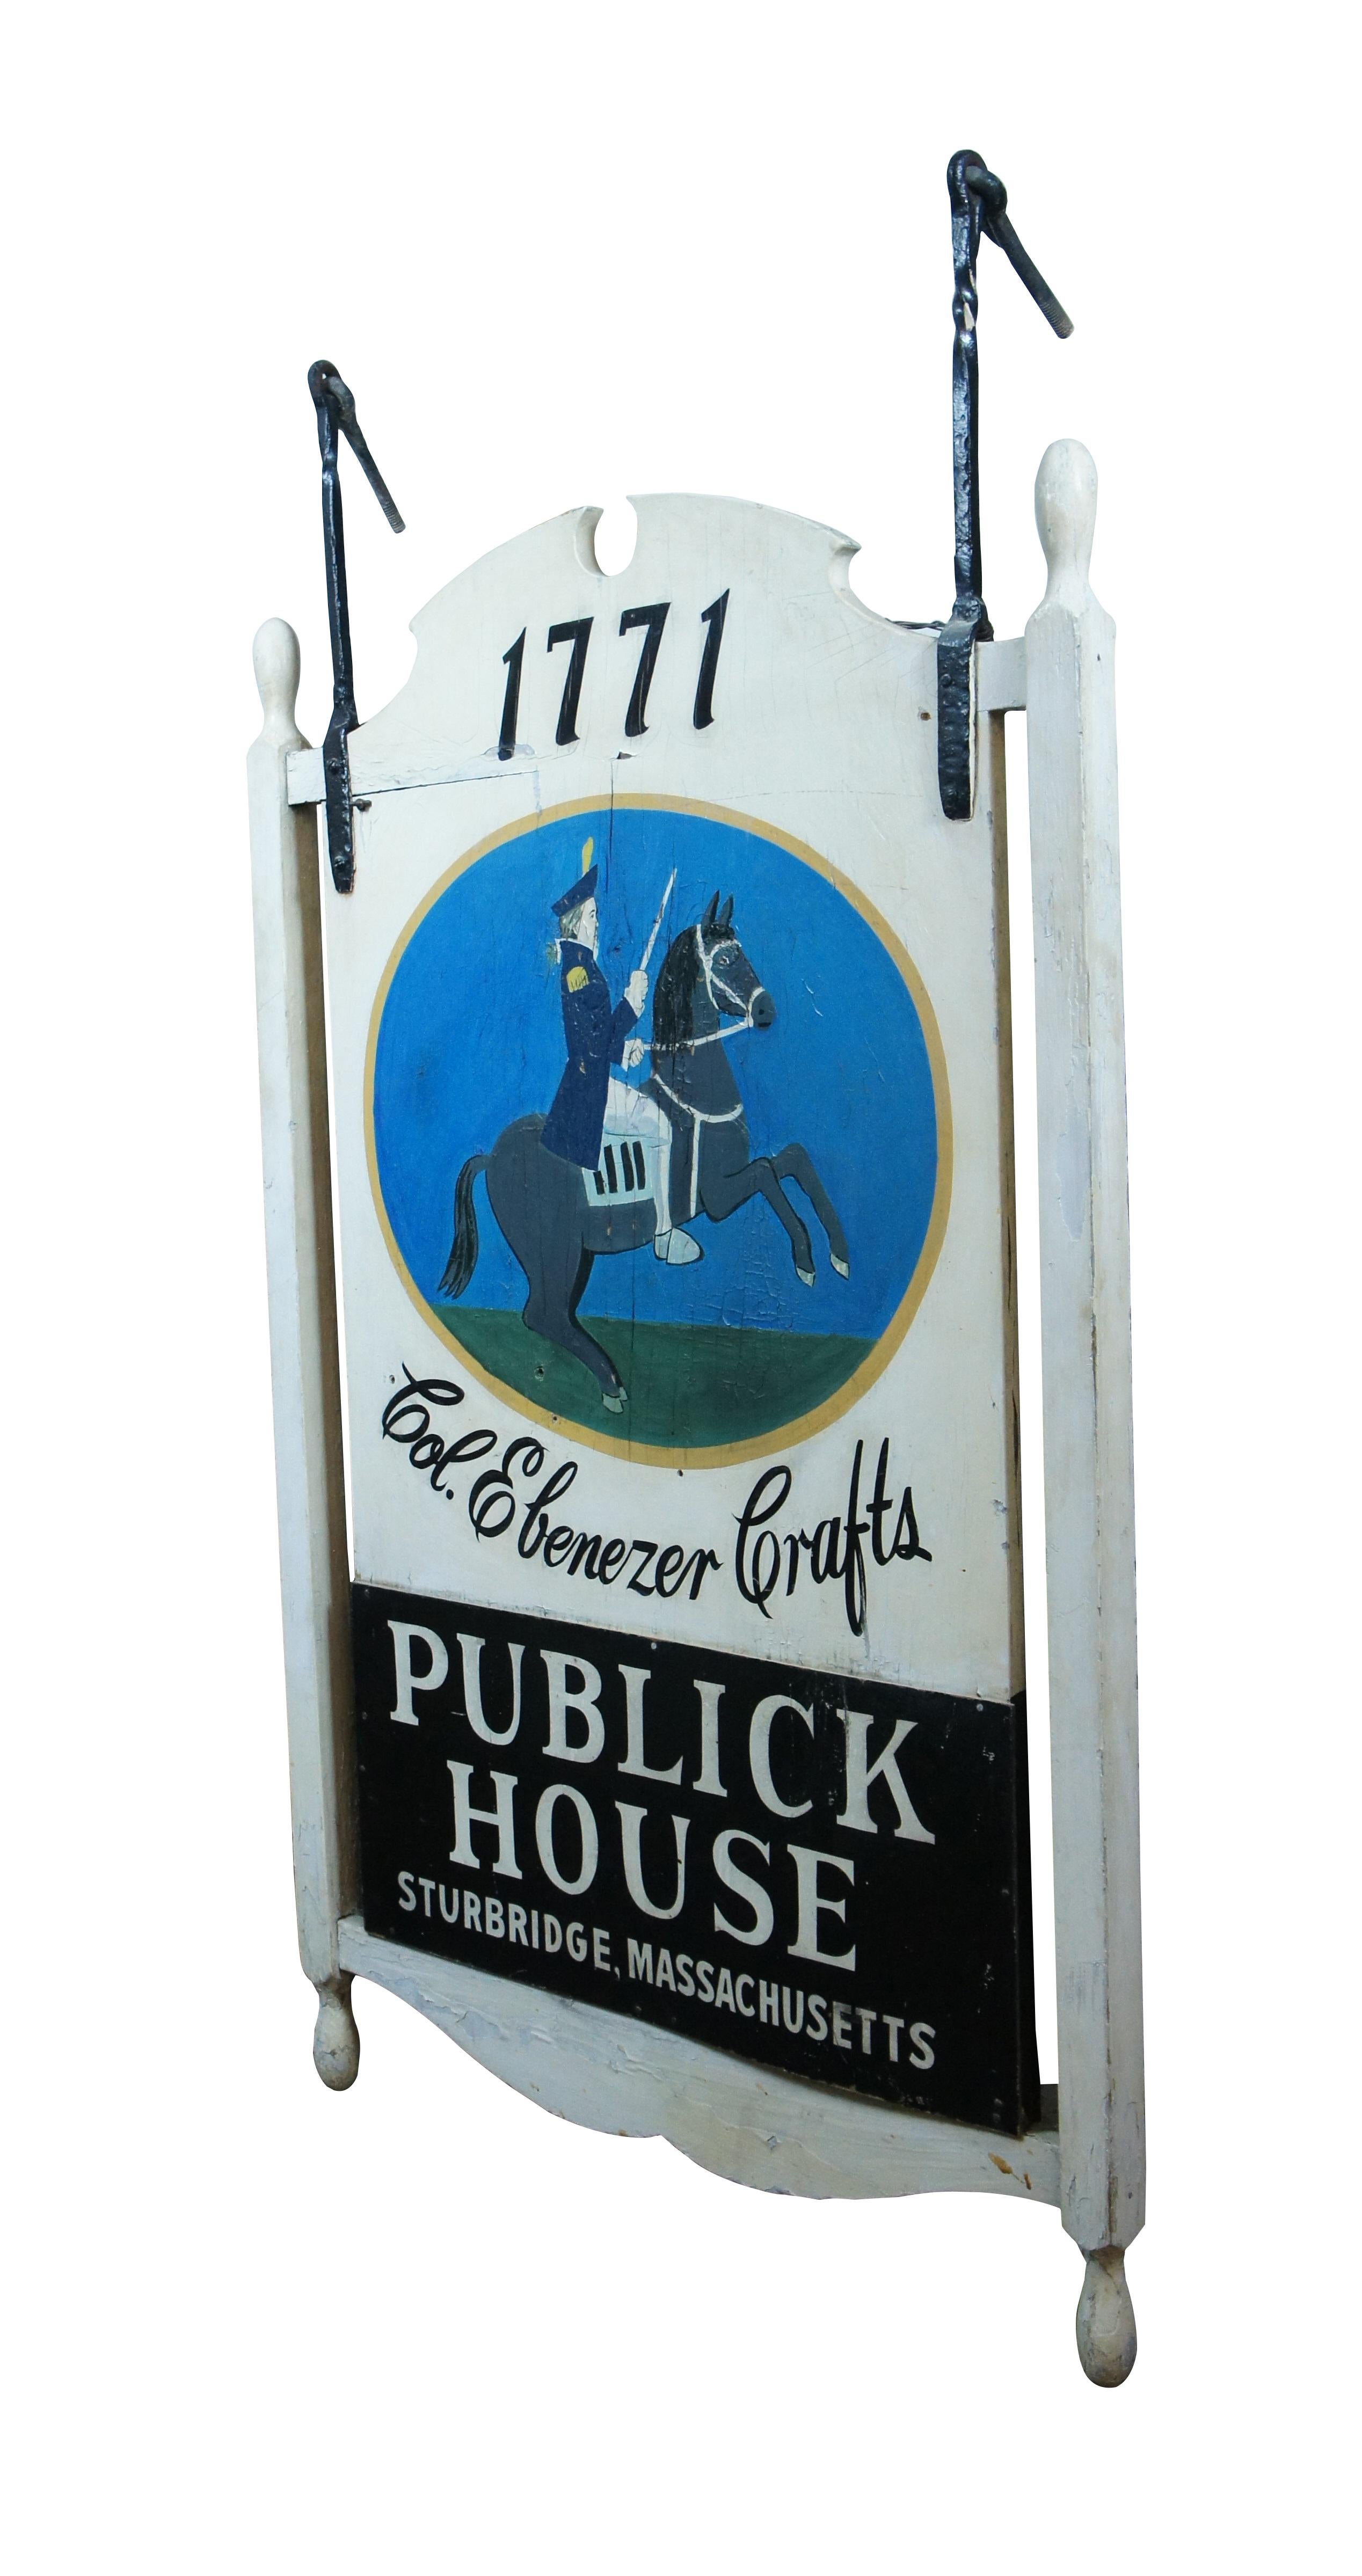 Rare antique salvaged Col. Ebenezer Crafts' Publick House of Sturbridge, Massachusetts, est. 1771 sign. Wood construction hand painted in white with black and white lettering around a blue, green and gold emblem portraying a Revolutionary soldier